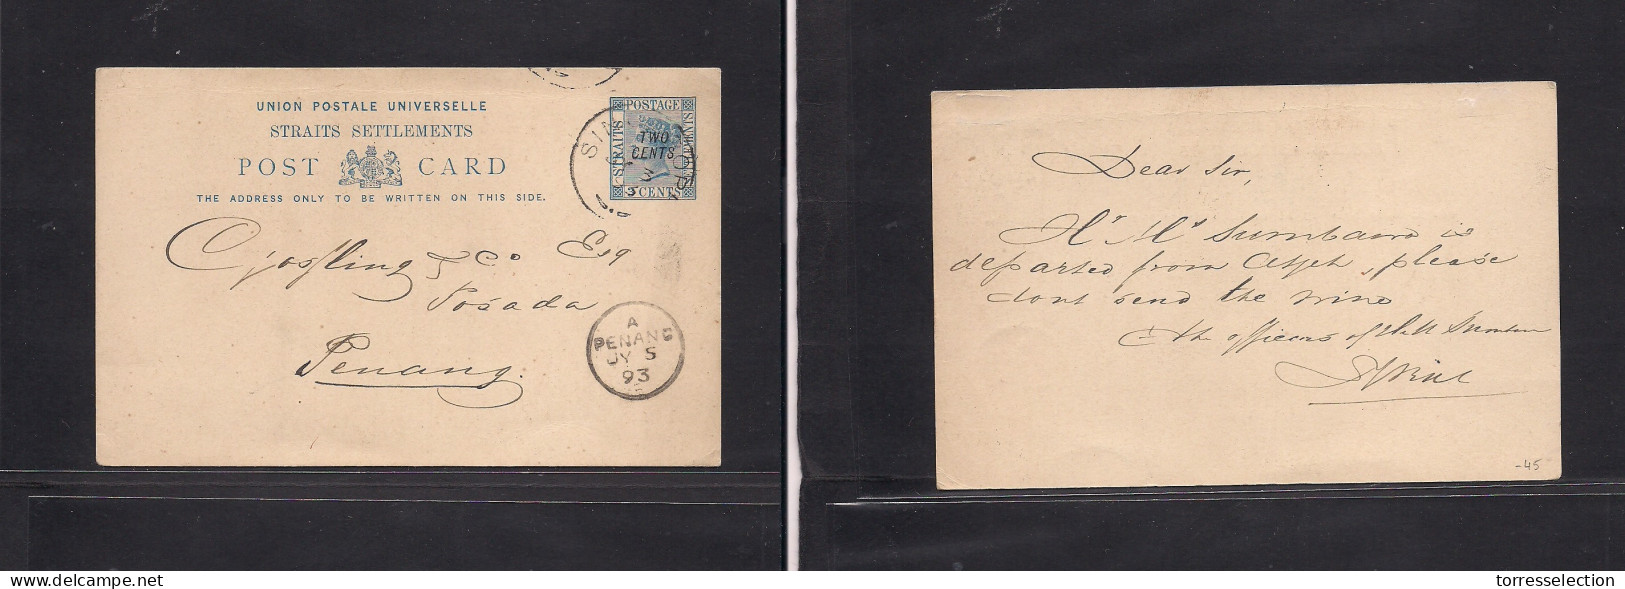 STRAITS SETTLEMENTS SINGAPORE. 1893 (3 July) Sing - Penang (5 July) 2c/3c Blue QV Ovptd Stat Card. VF Used With Text. Ar - Singapore (1959-...)